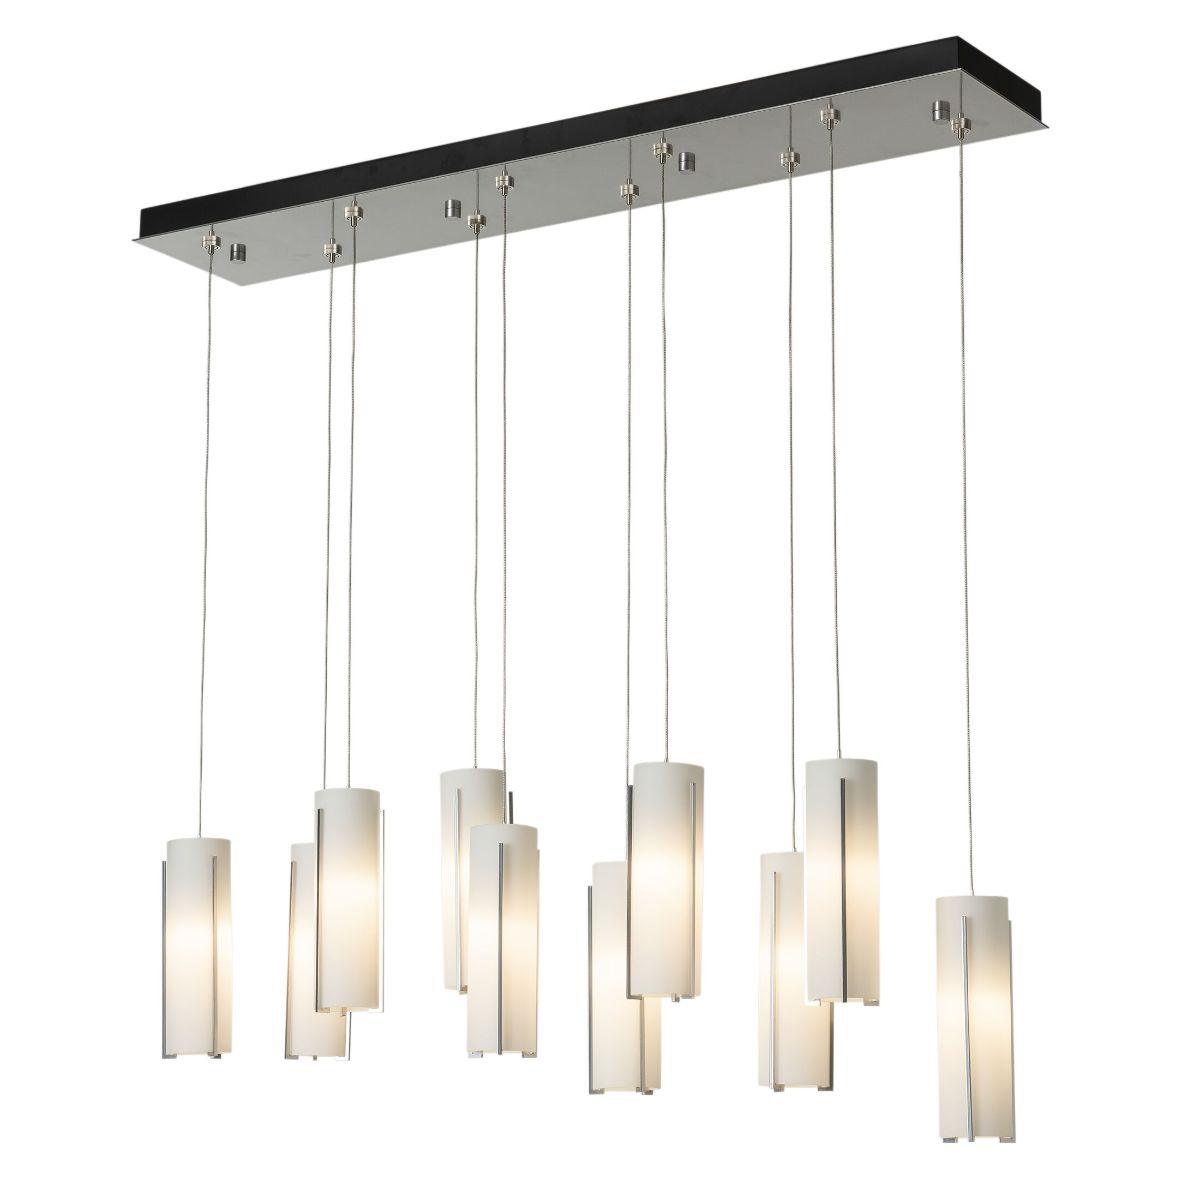 Exos 45 in. 10 Lights Linear Pendant Light with Standard Height